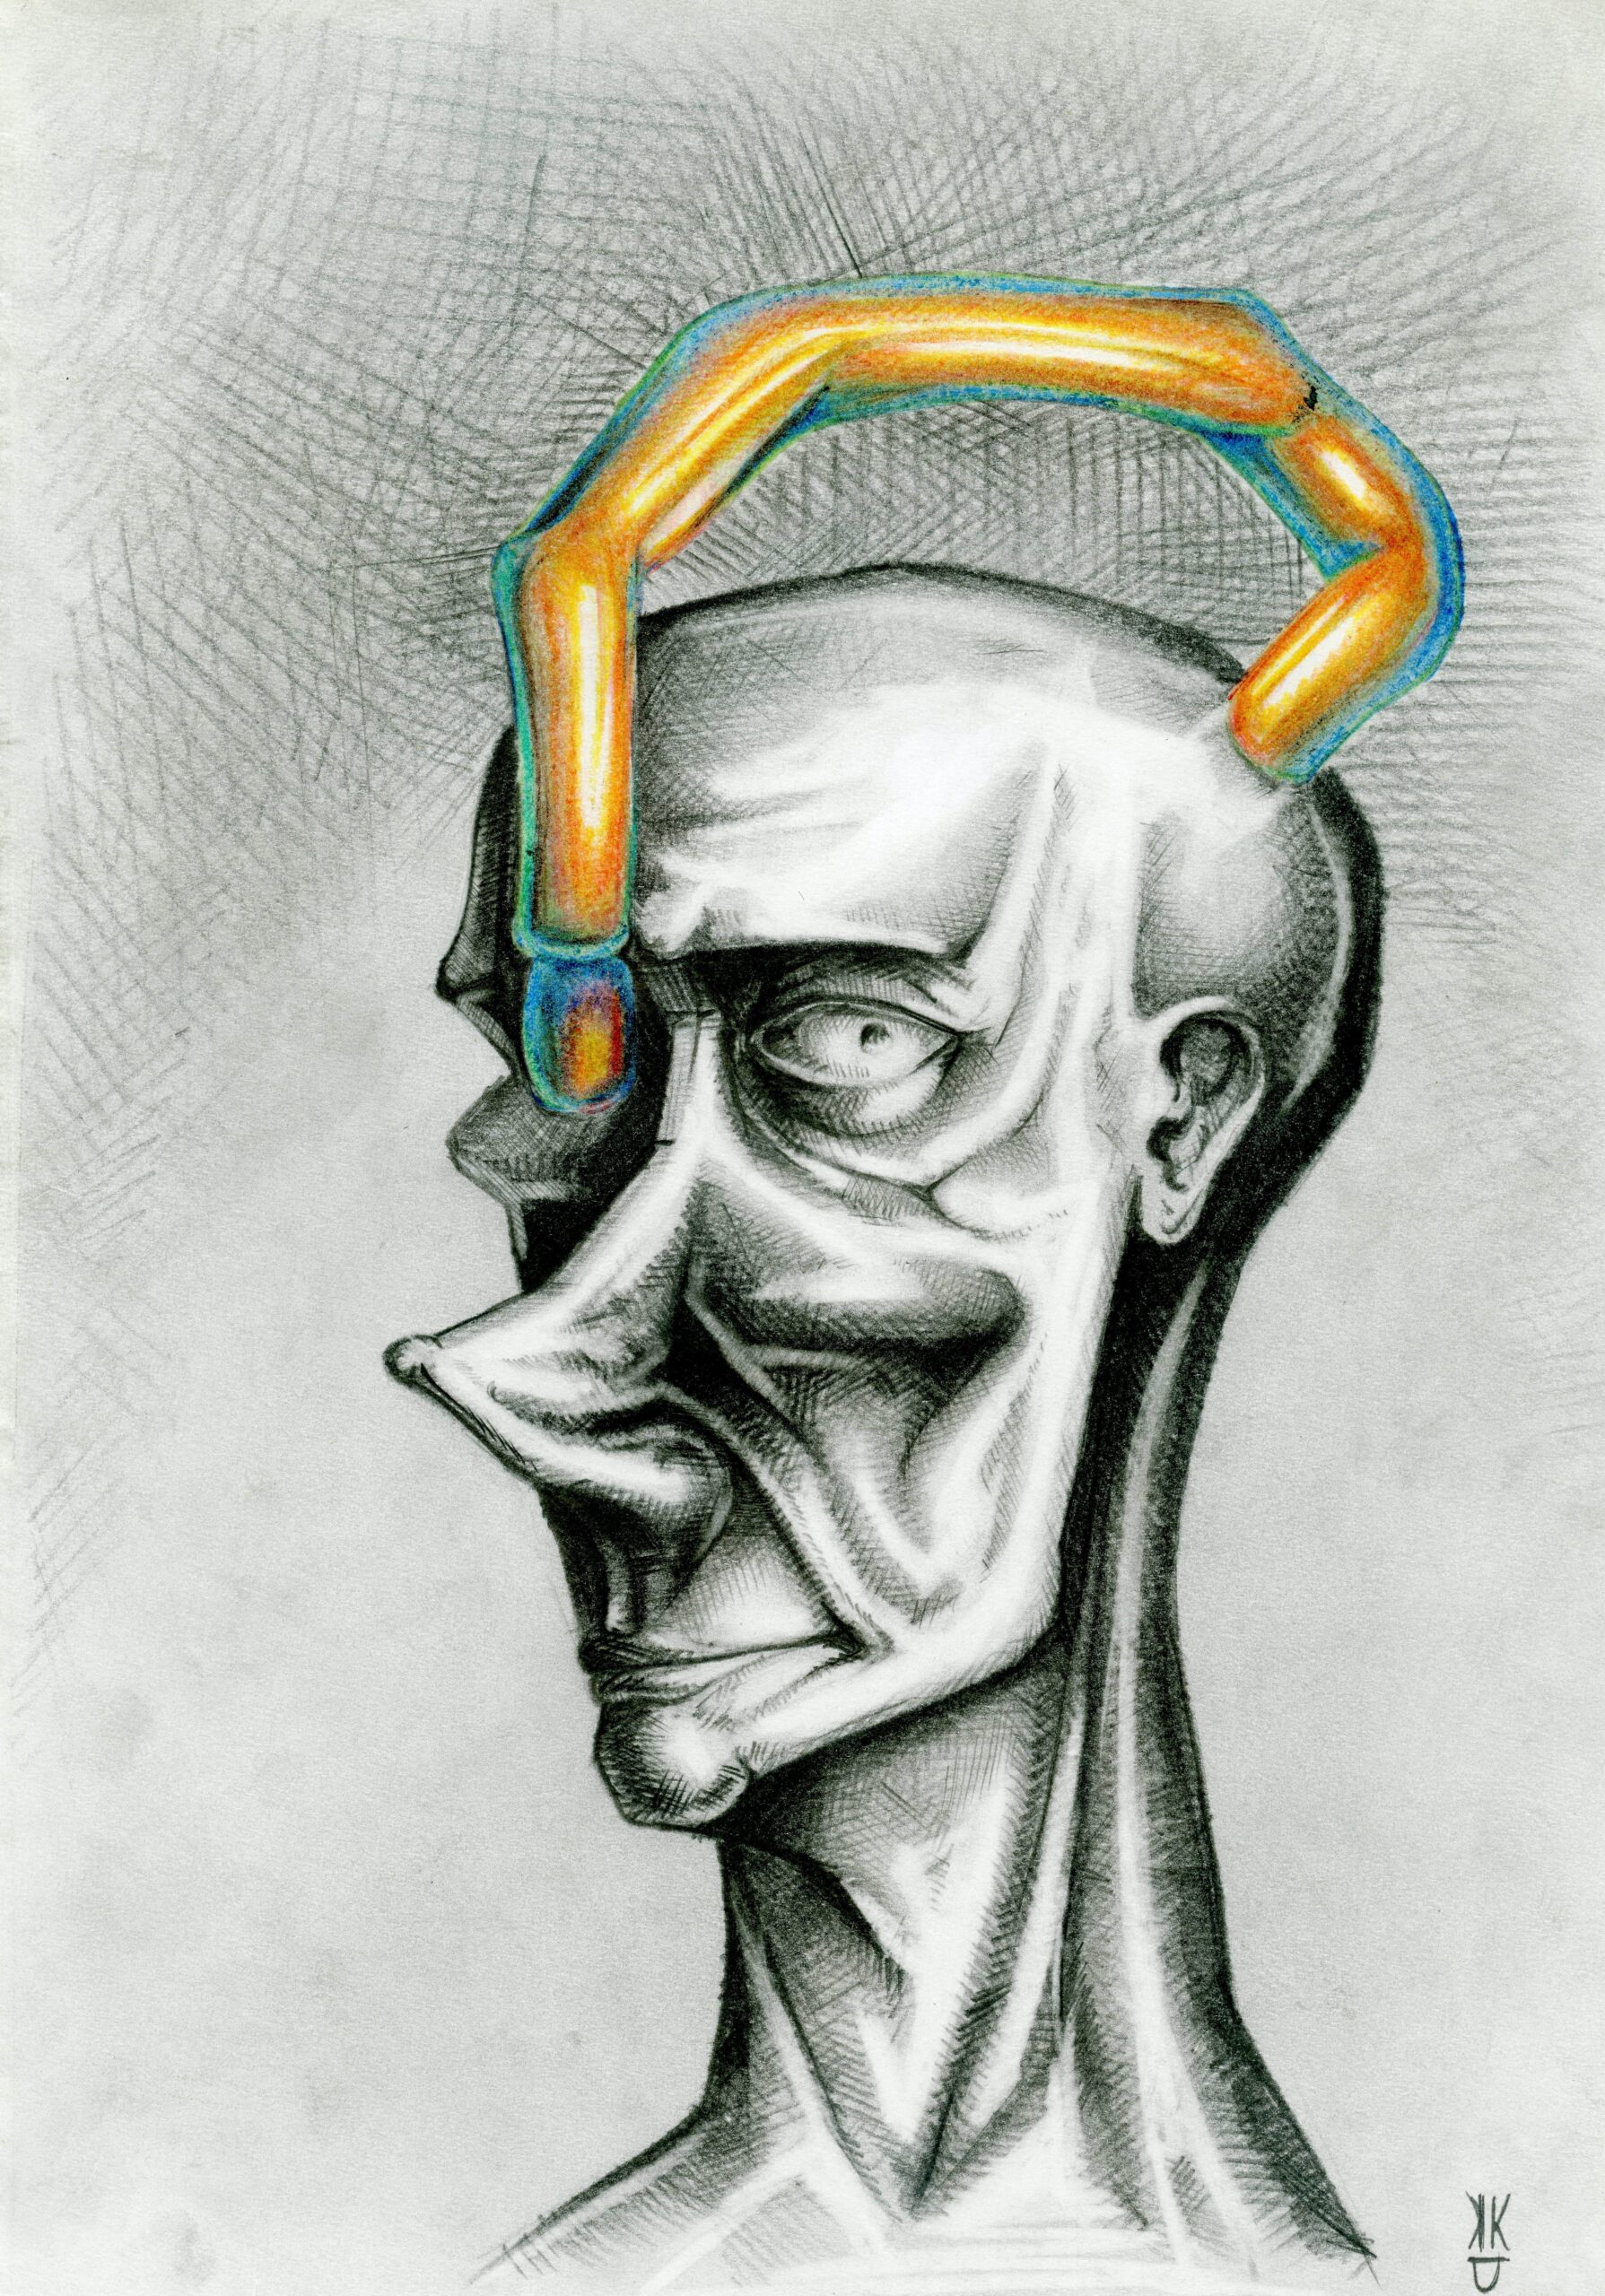 4. Wire, Hatters 4, 2020, pencil, paper, 29 x 21 cm 190 euro